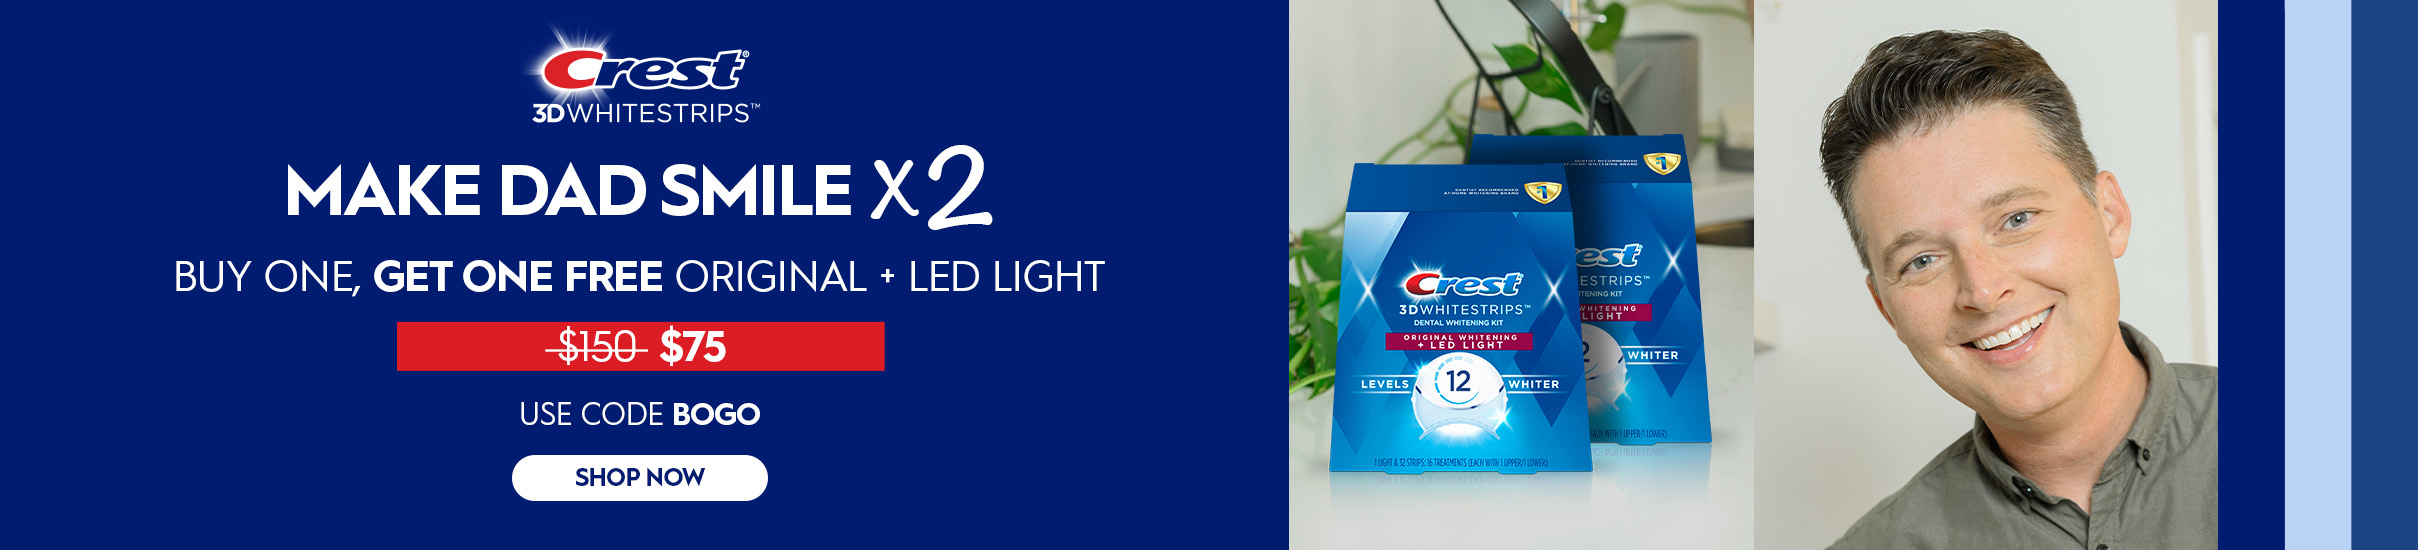 Man smiles & holds a Glam White strip. Next to him is 2 Original + LED Light kits. Get 2 packs for the price of 1 with code BOGO. $150 value now $75.
